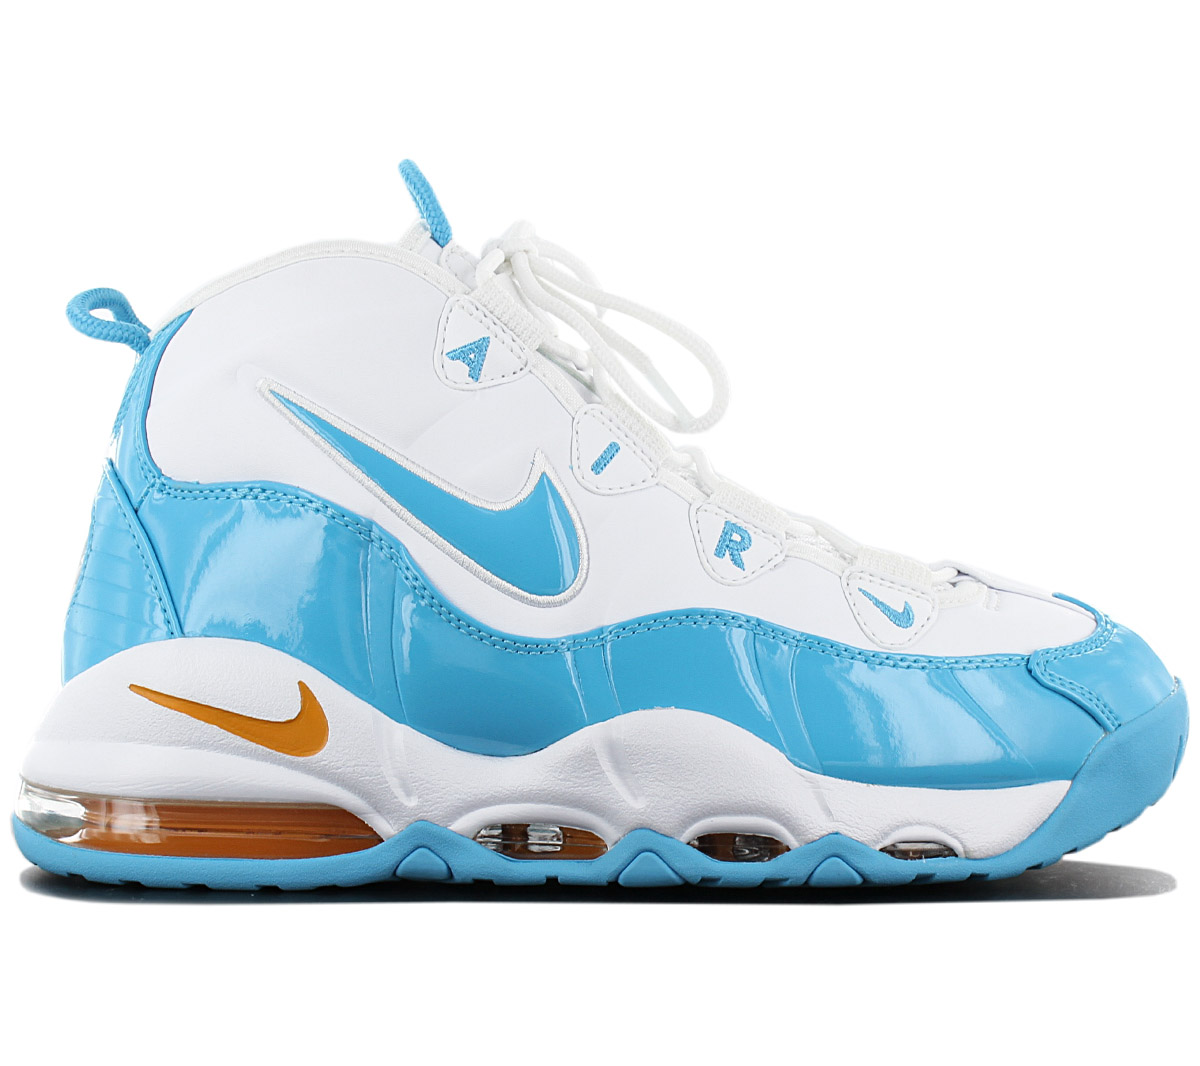 NEW Nike Air Max Uptempo 95 CK0892-100 